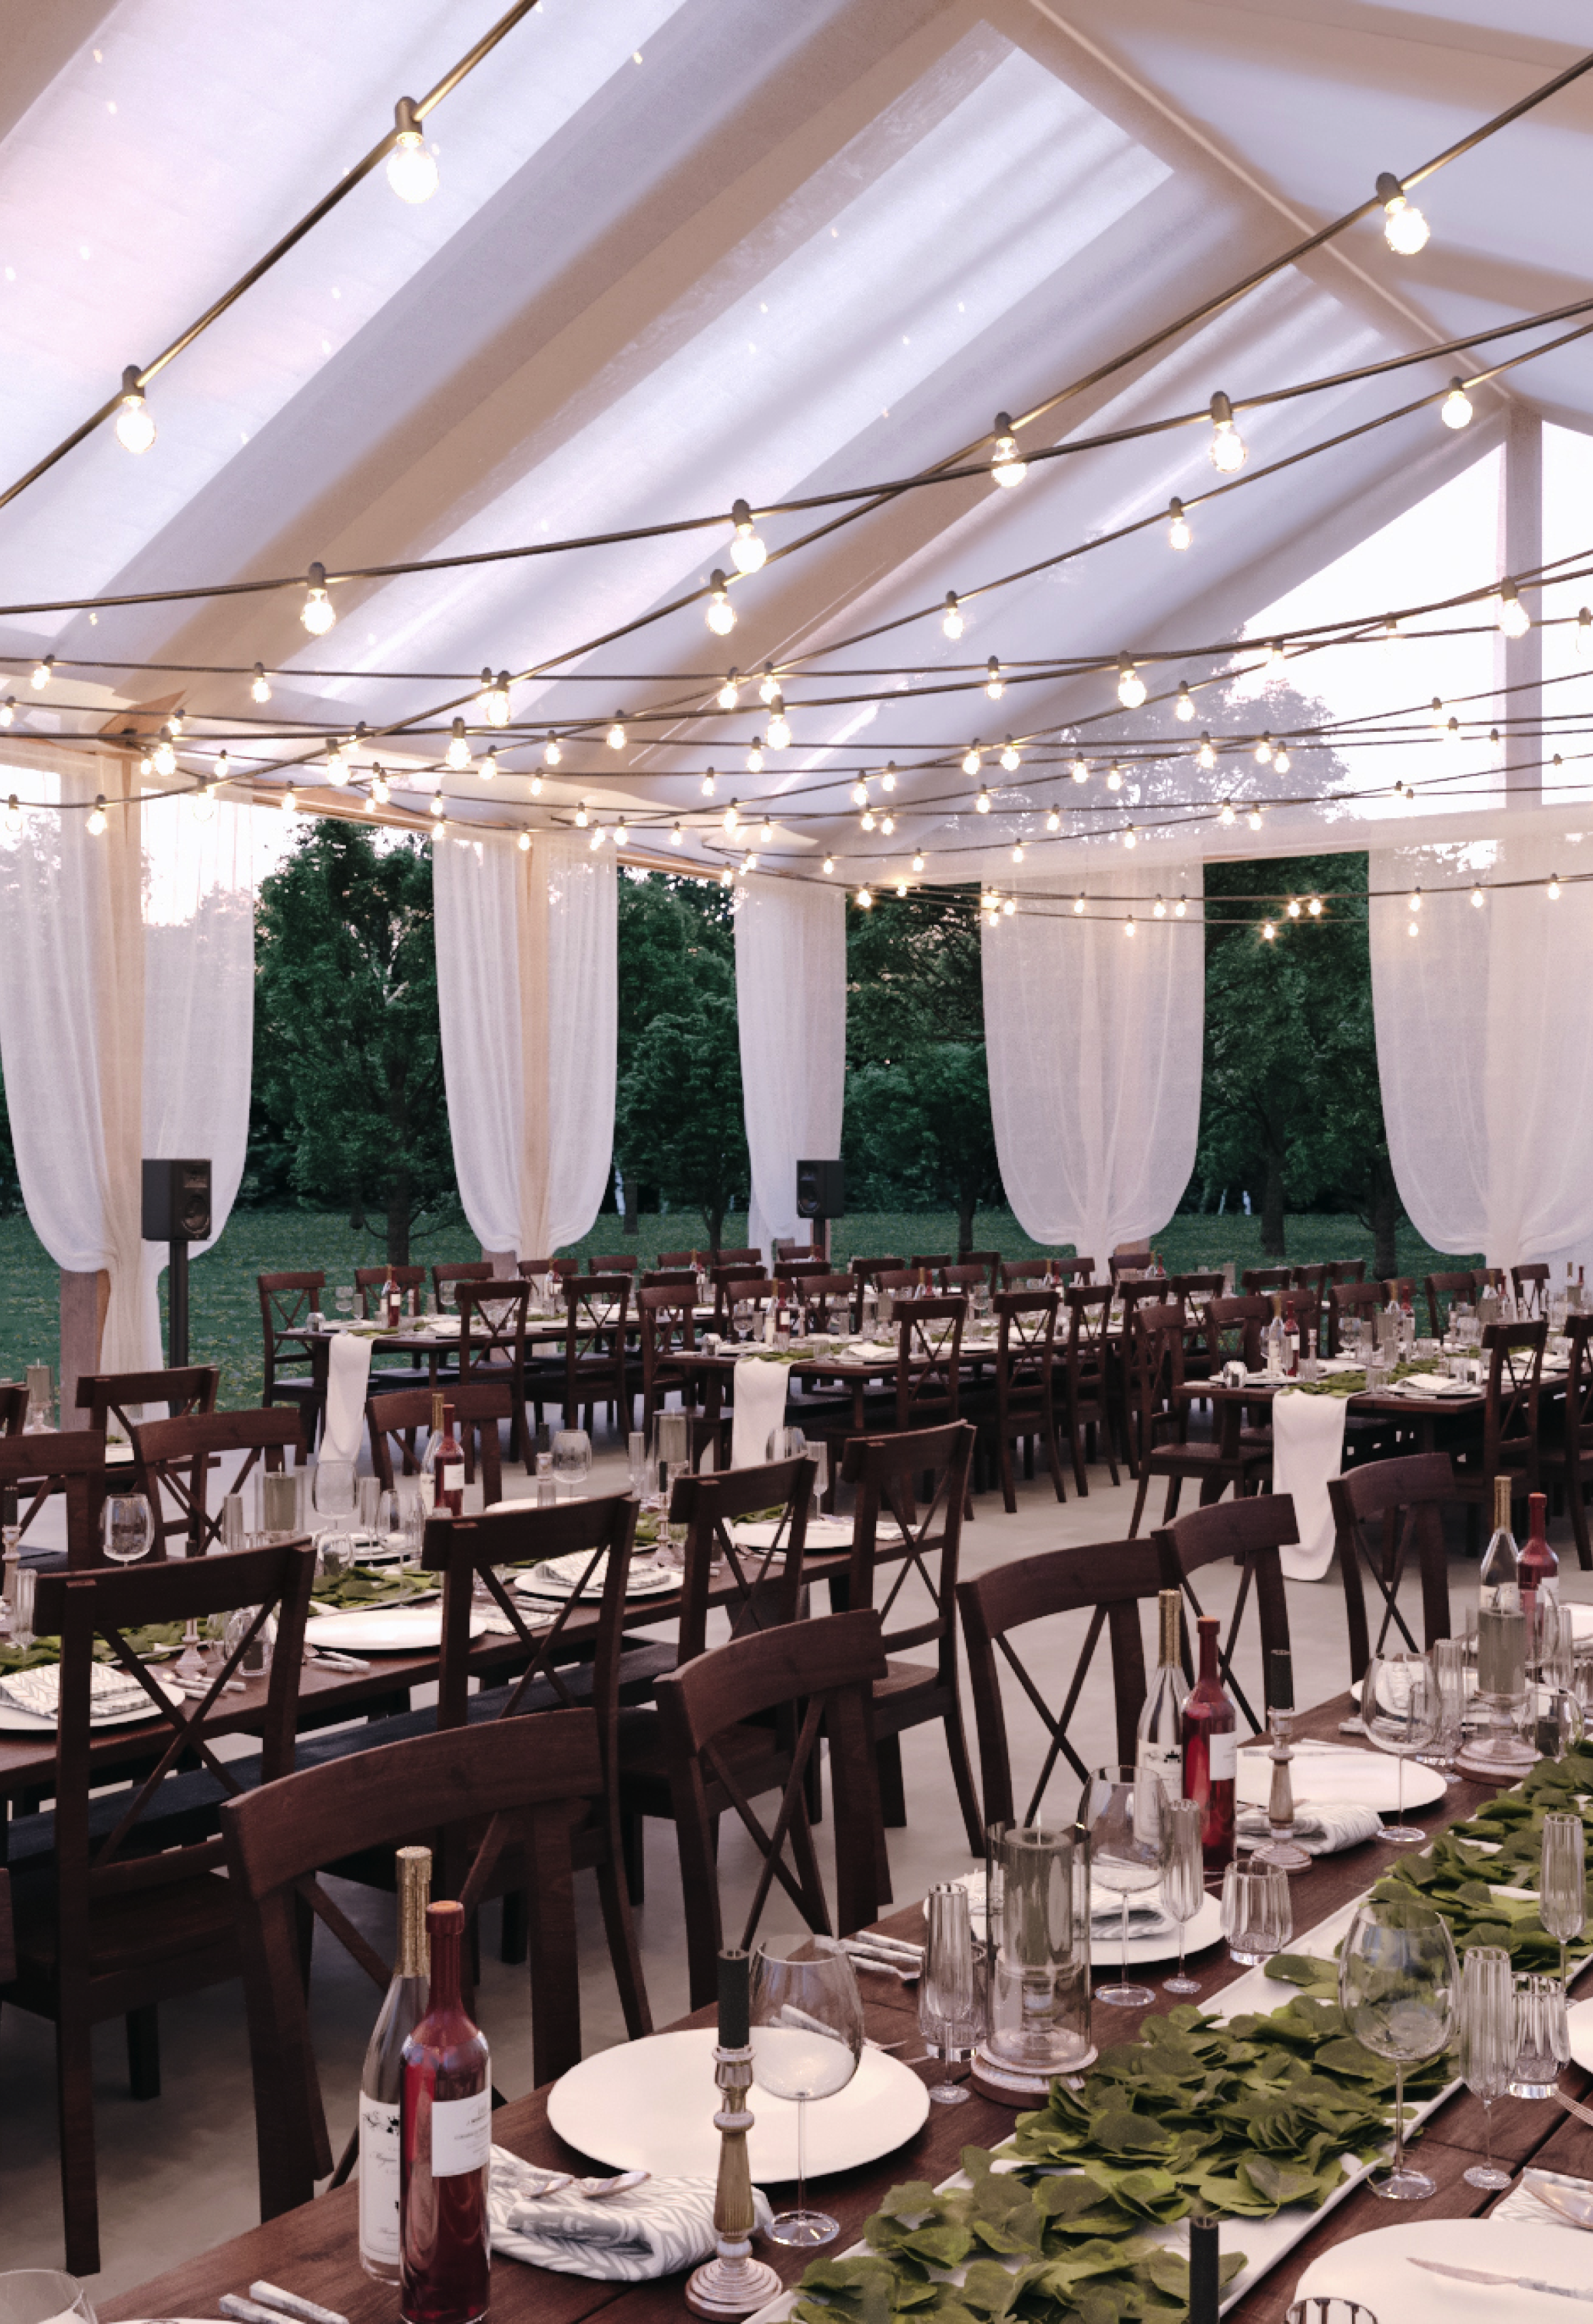 Realistic image production of exterior rendering for wedding dinner featuring lighting, cutlery and tent in 3dsm and vray